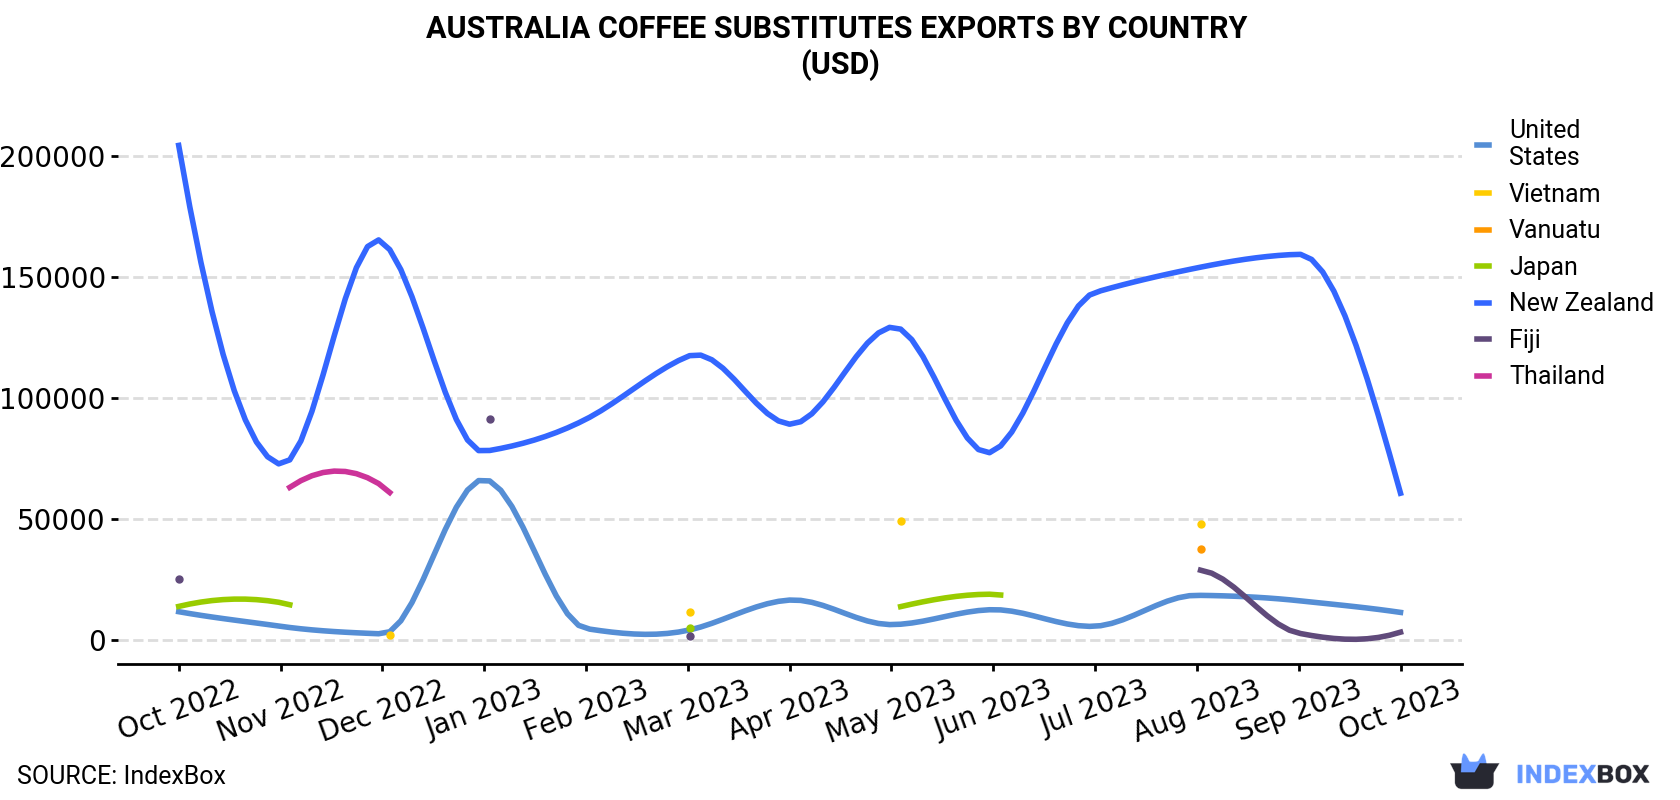 Australia Coffee Substitutes Exports By Country (USD)